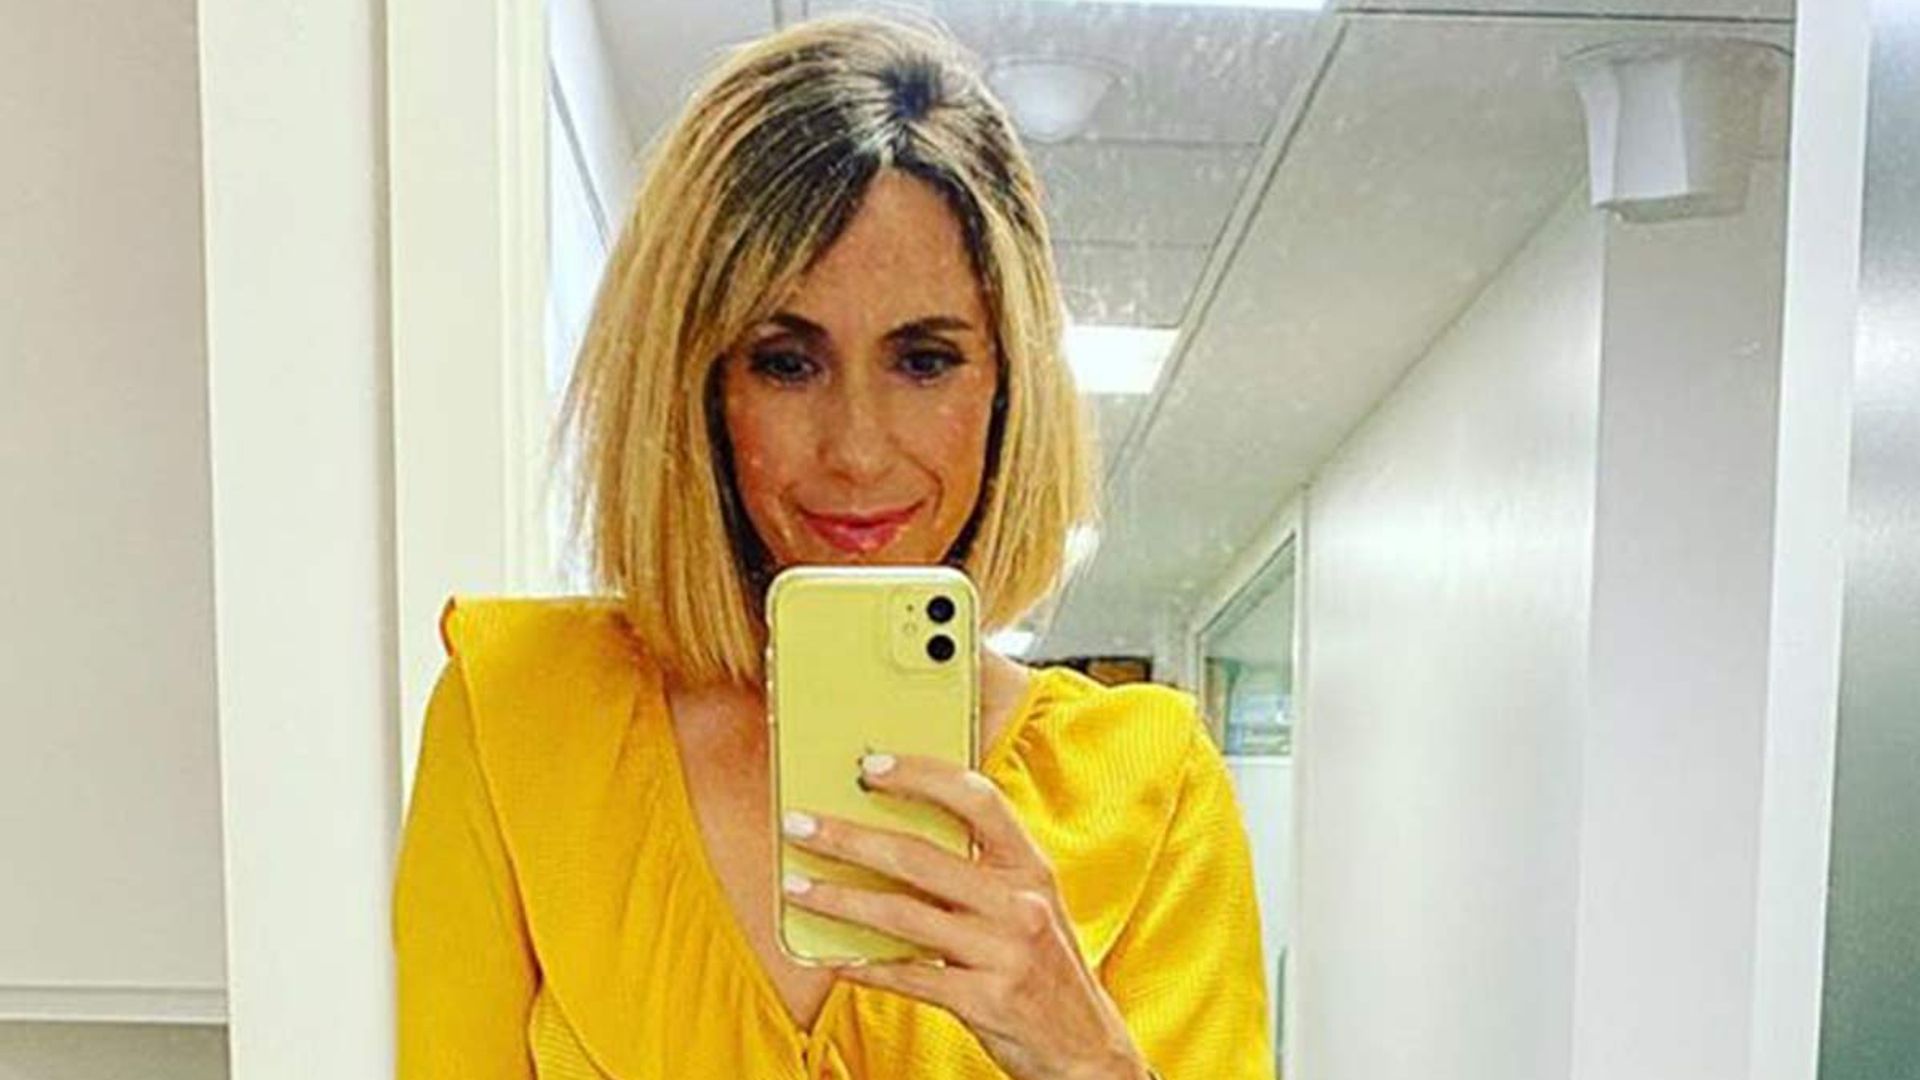 Alex Jones' gorgeous yellow blouse might be the brightest top we've ever seen